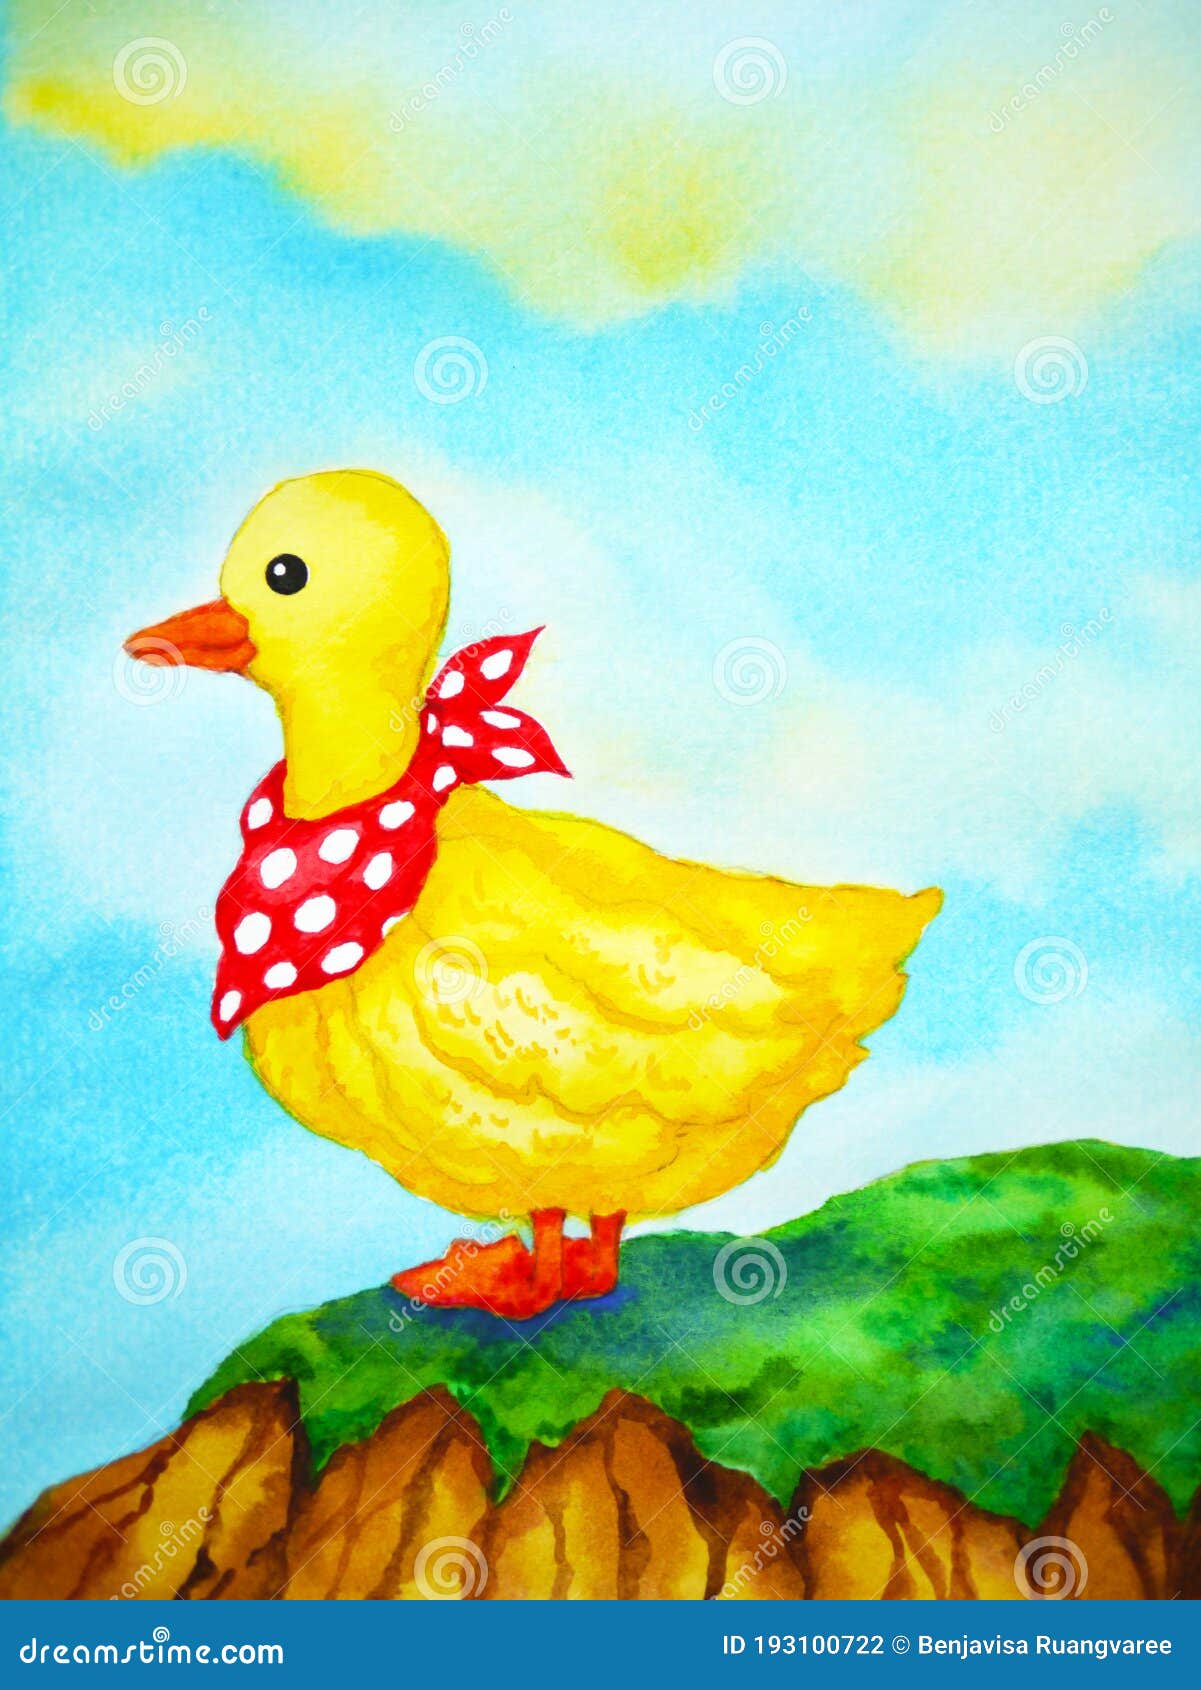 Yellow Little Duck Red Scarf Cartoon Drawing Watercolor Painting  Illustration Design Stock Illustration - Illustration of color, abstract:  193100722